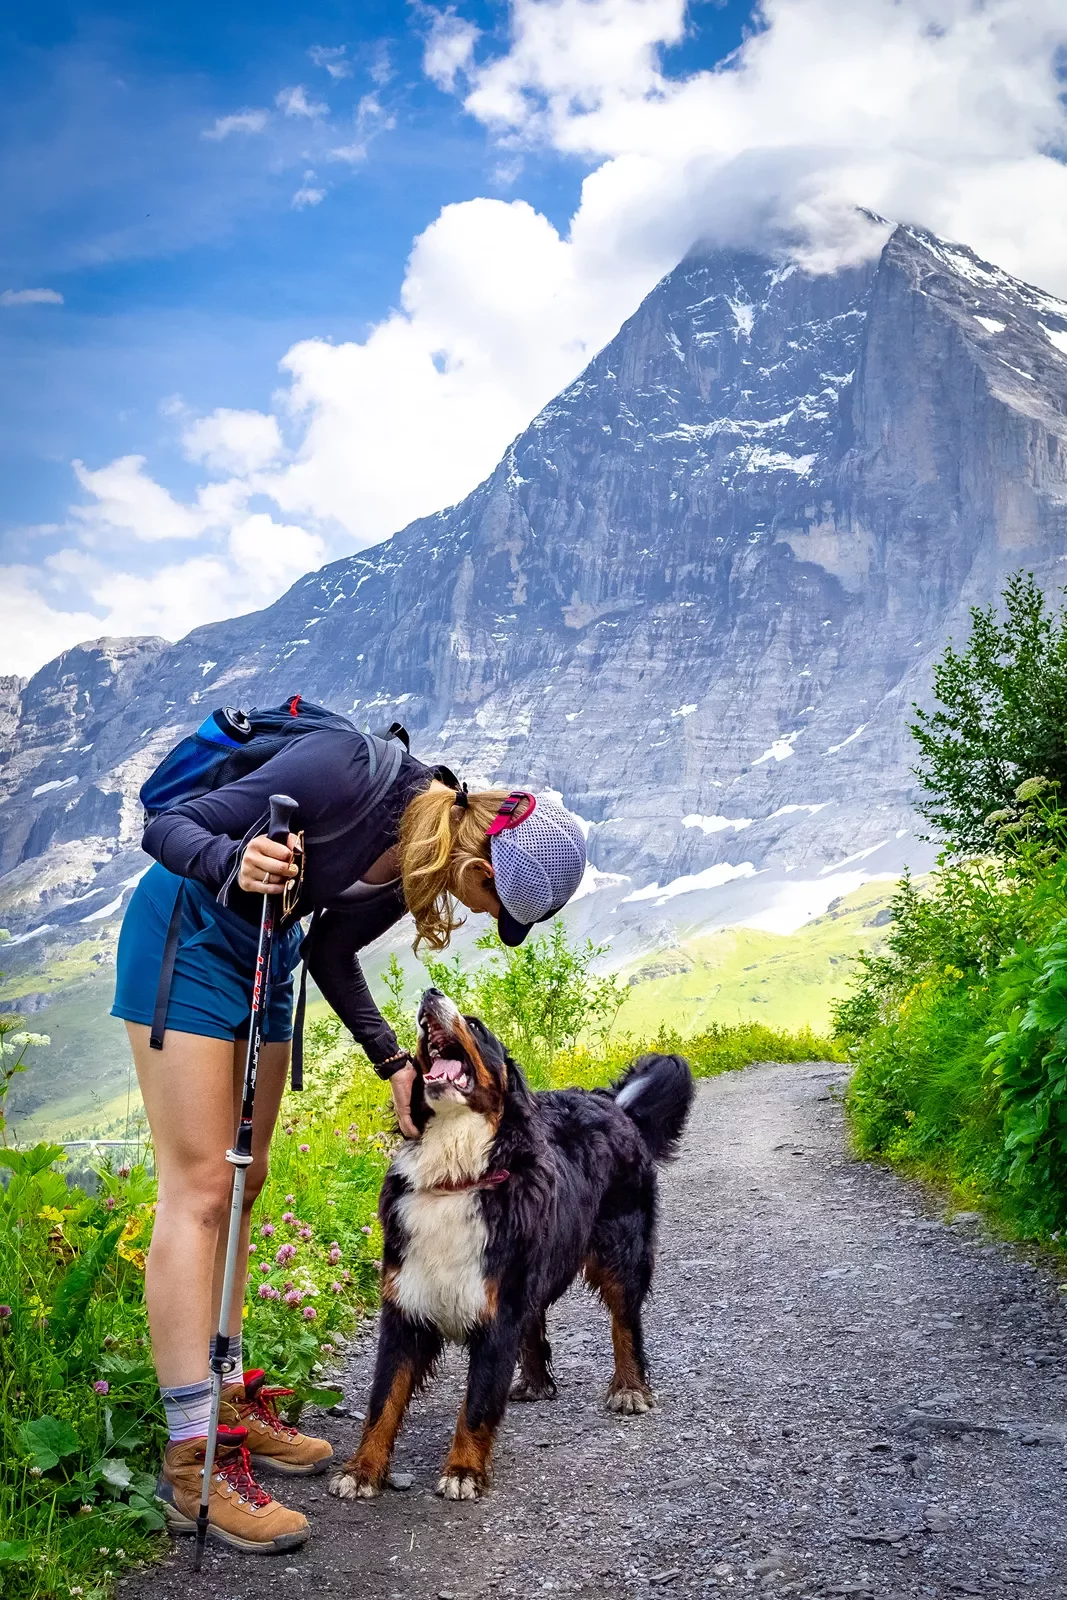 Guest with dog on trail, large cloud covered mountain in background.